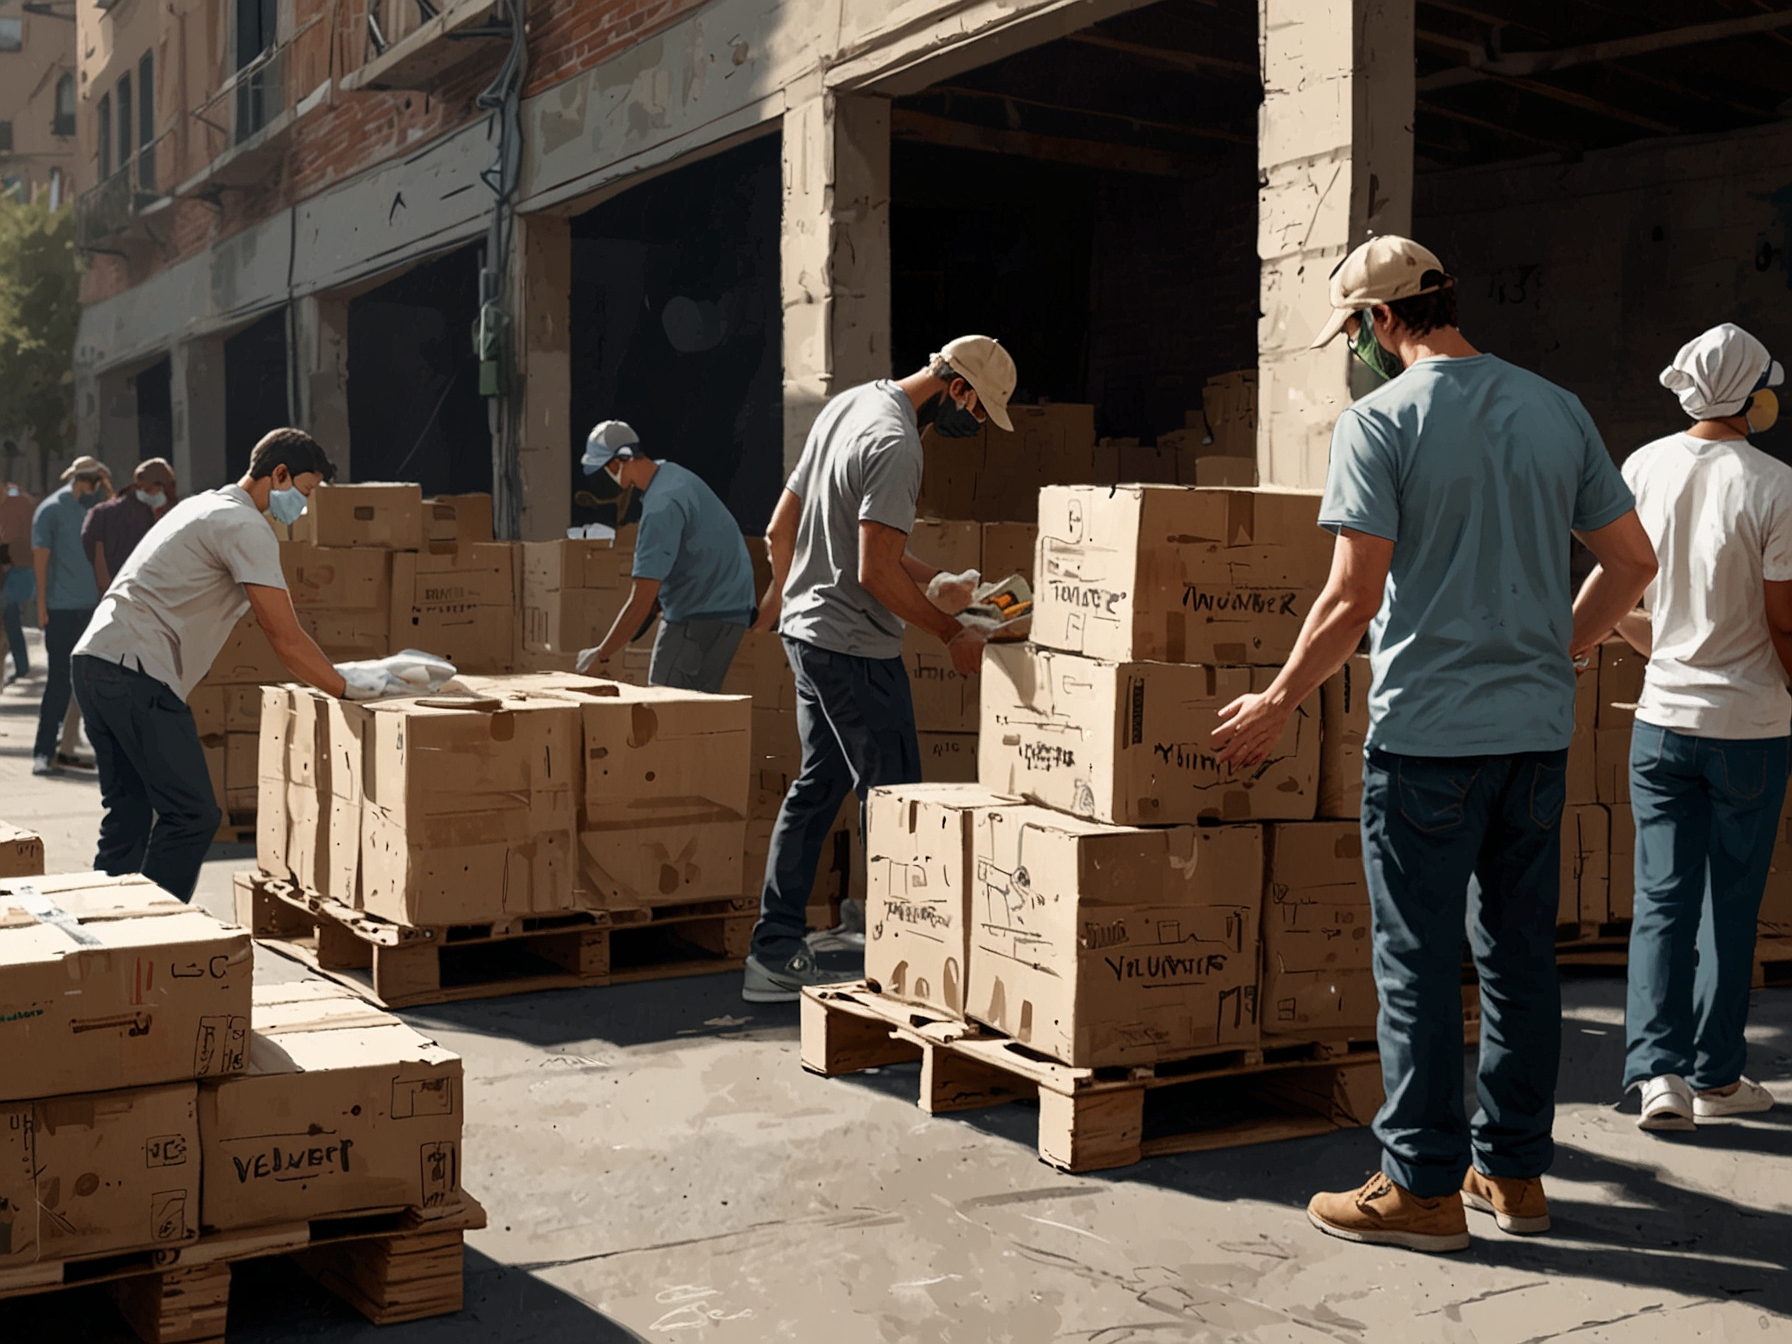 An image showing volunteers organizing pallets of food, water, and other essential supplies, ready to be distributed to affected communities during a crisis.